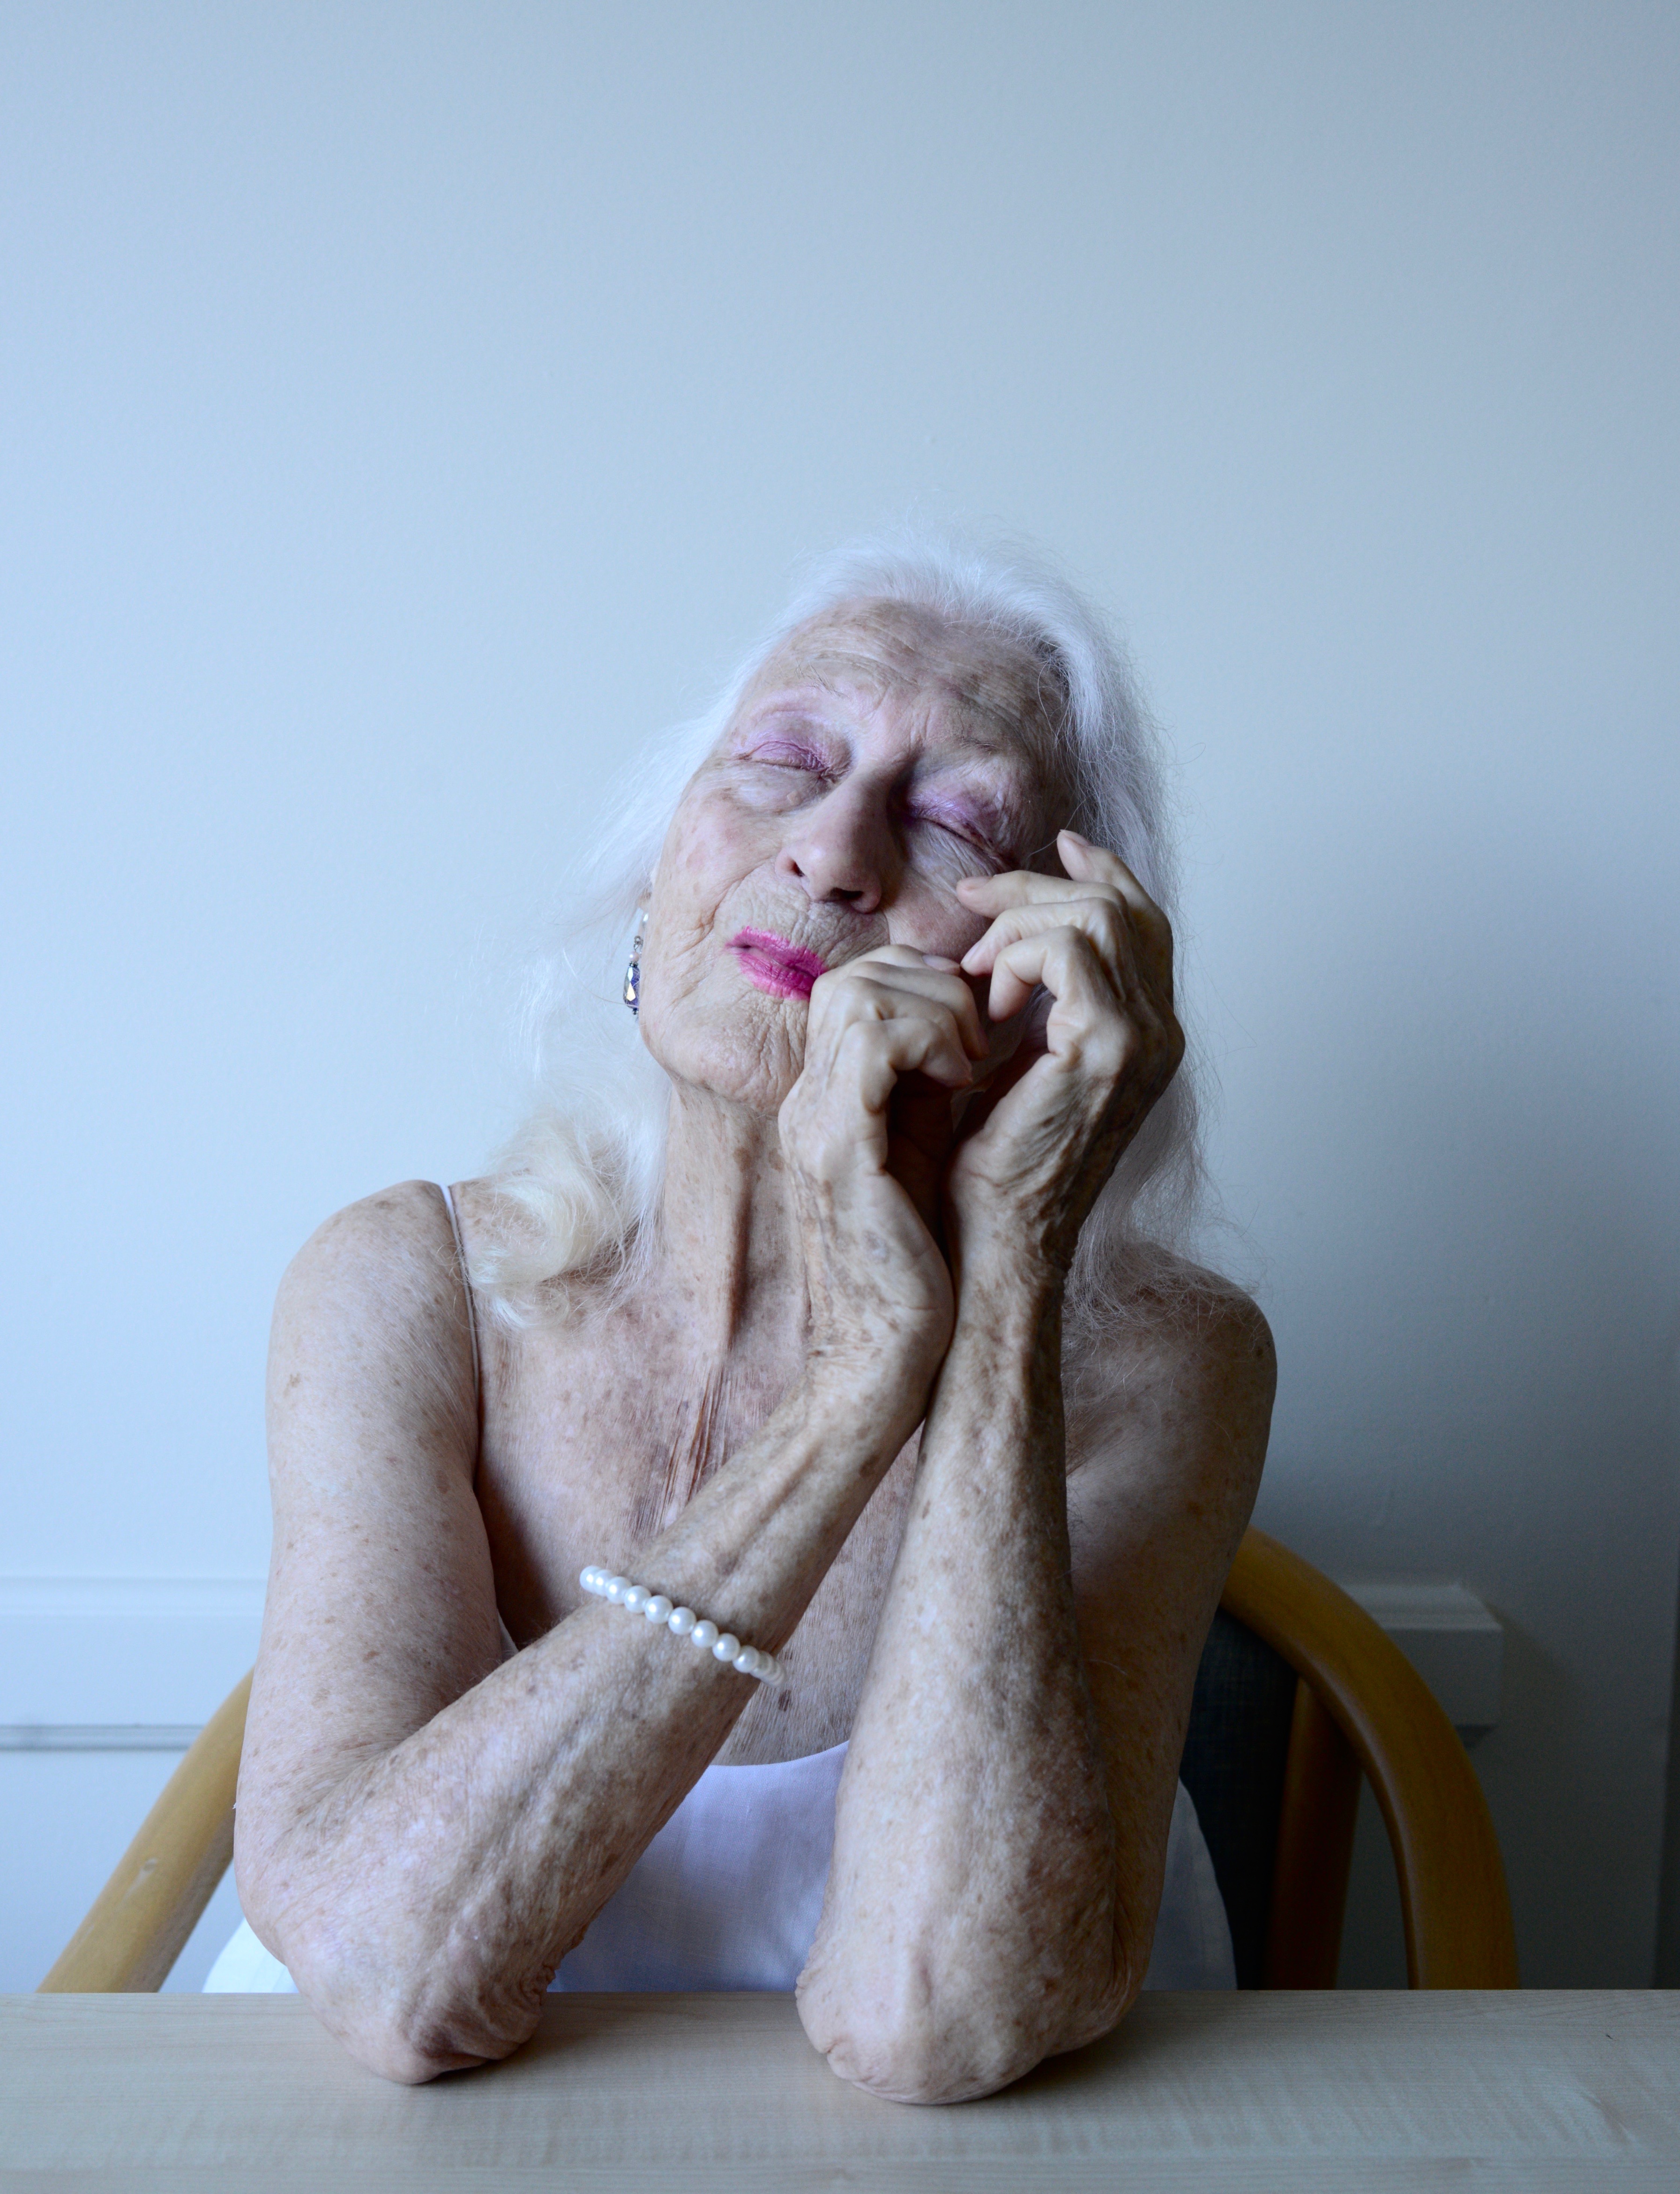 An older woman closes her eyes, looking wistful.